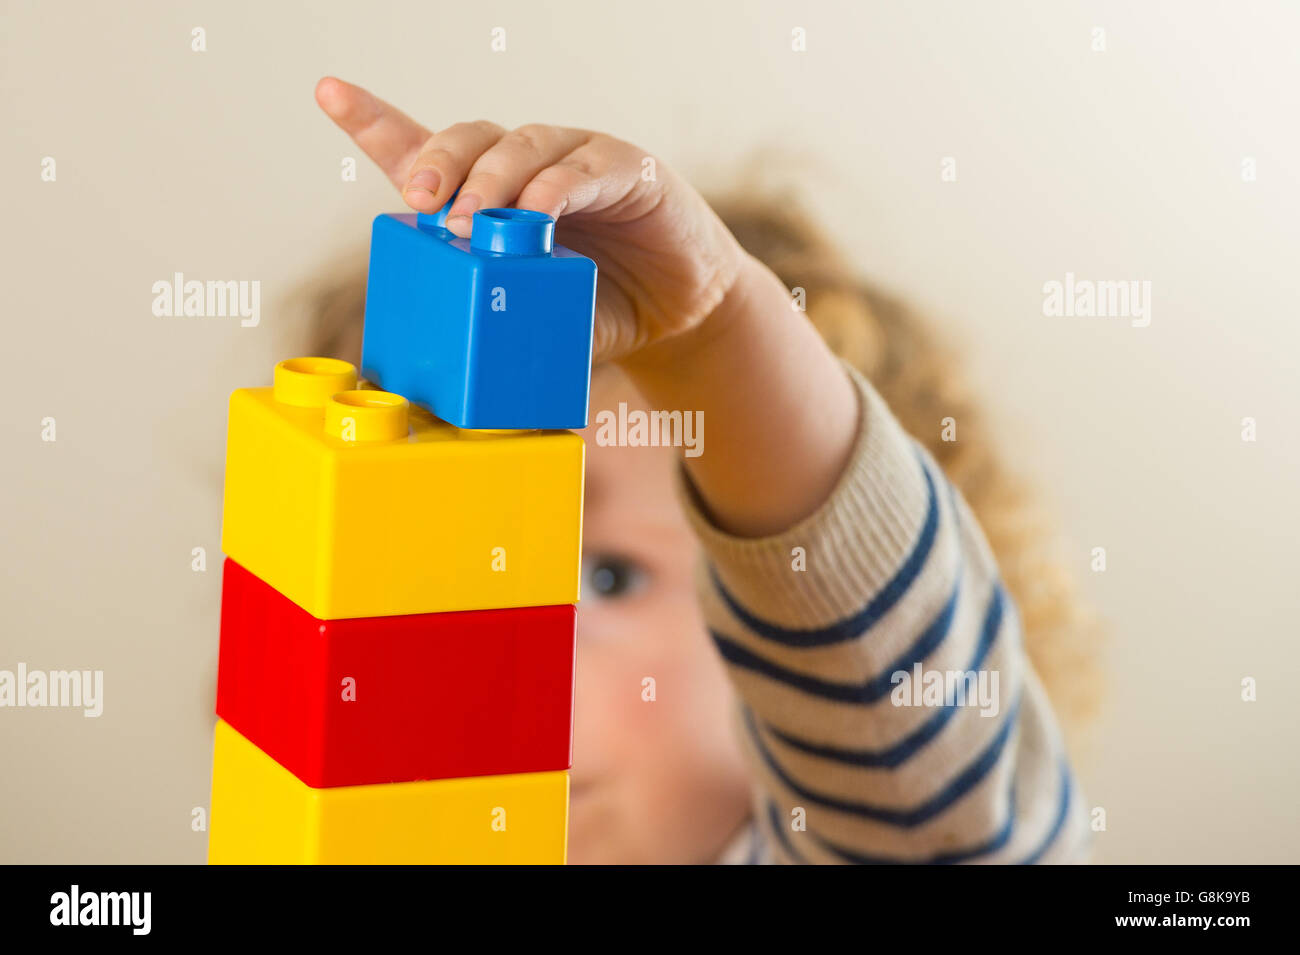 A preschool age child plays with plastic building blocks. Stock Photo